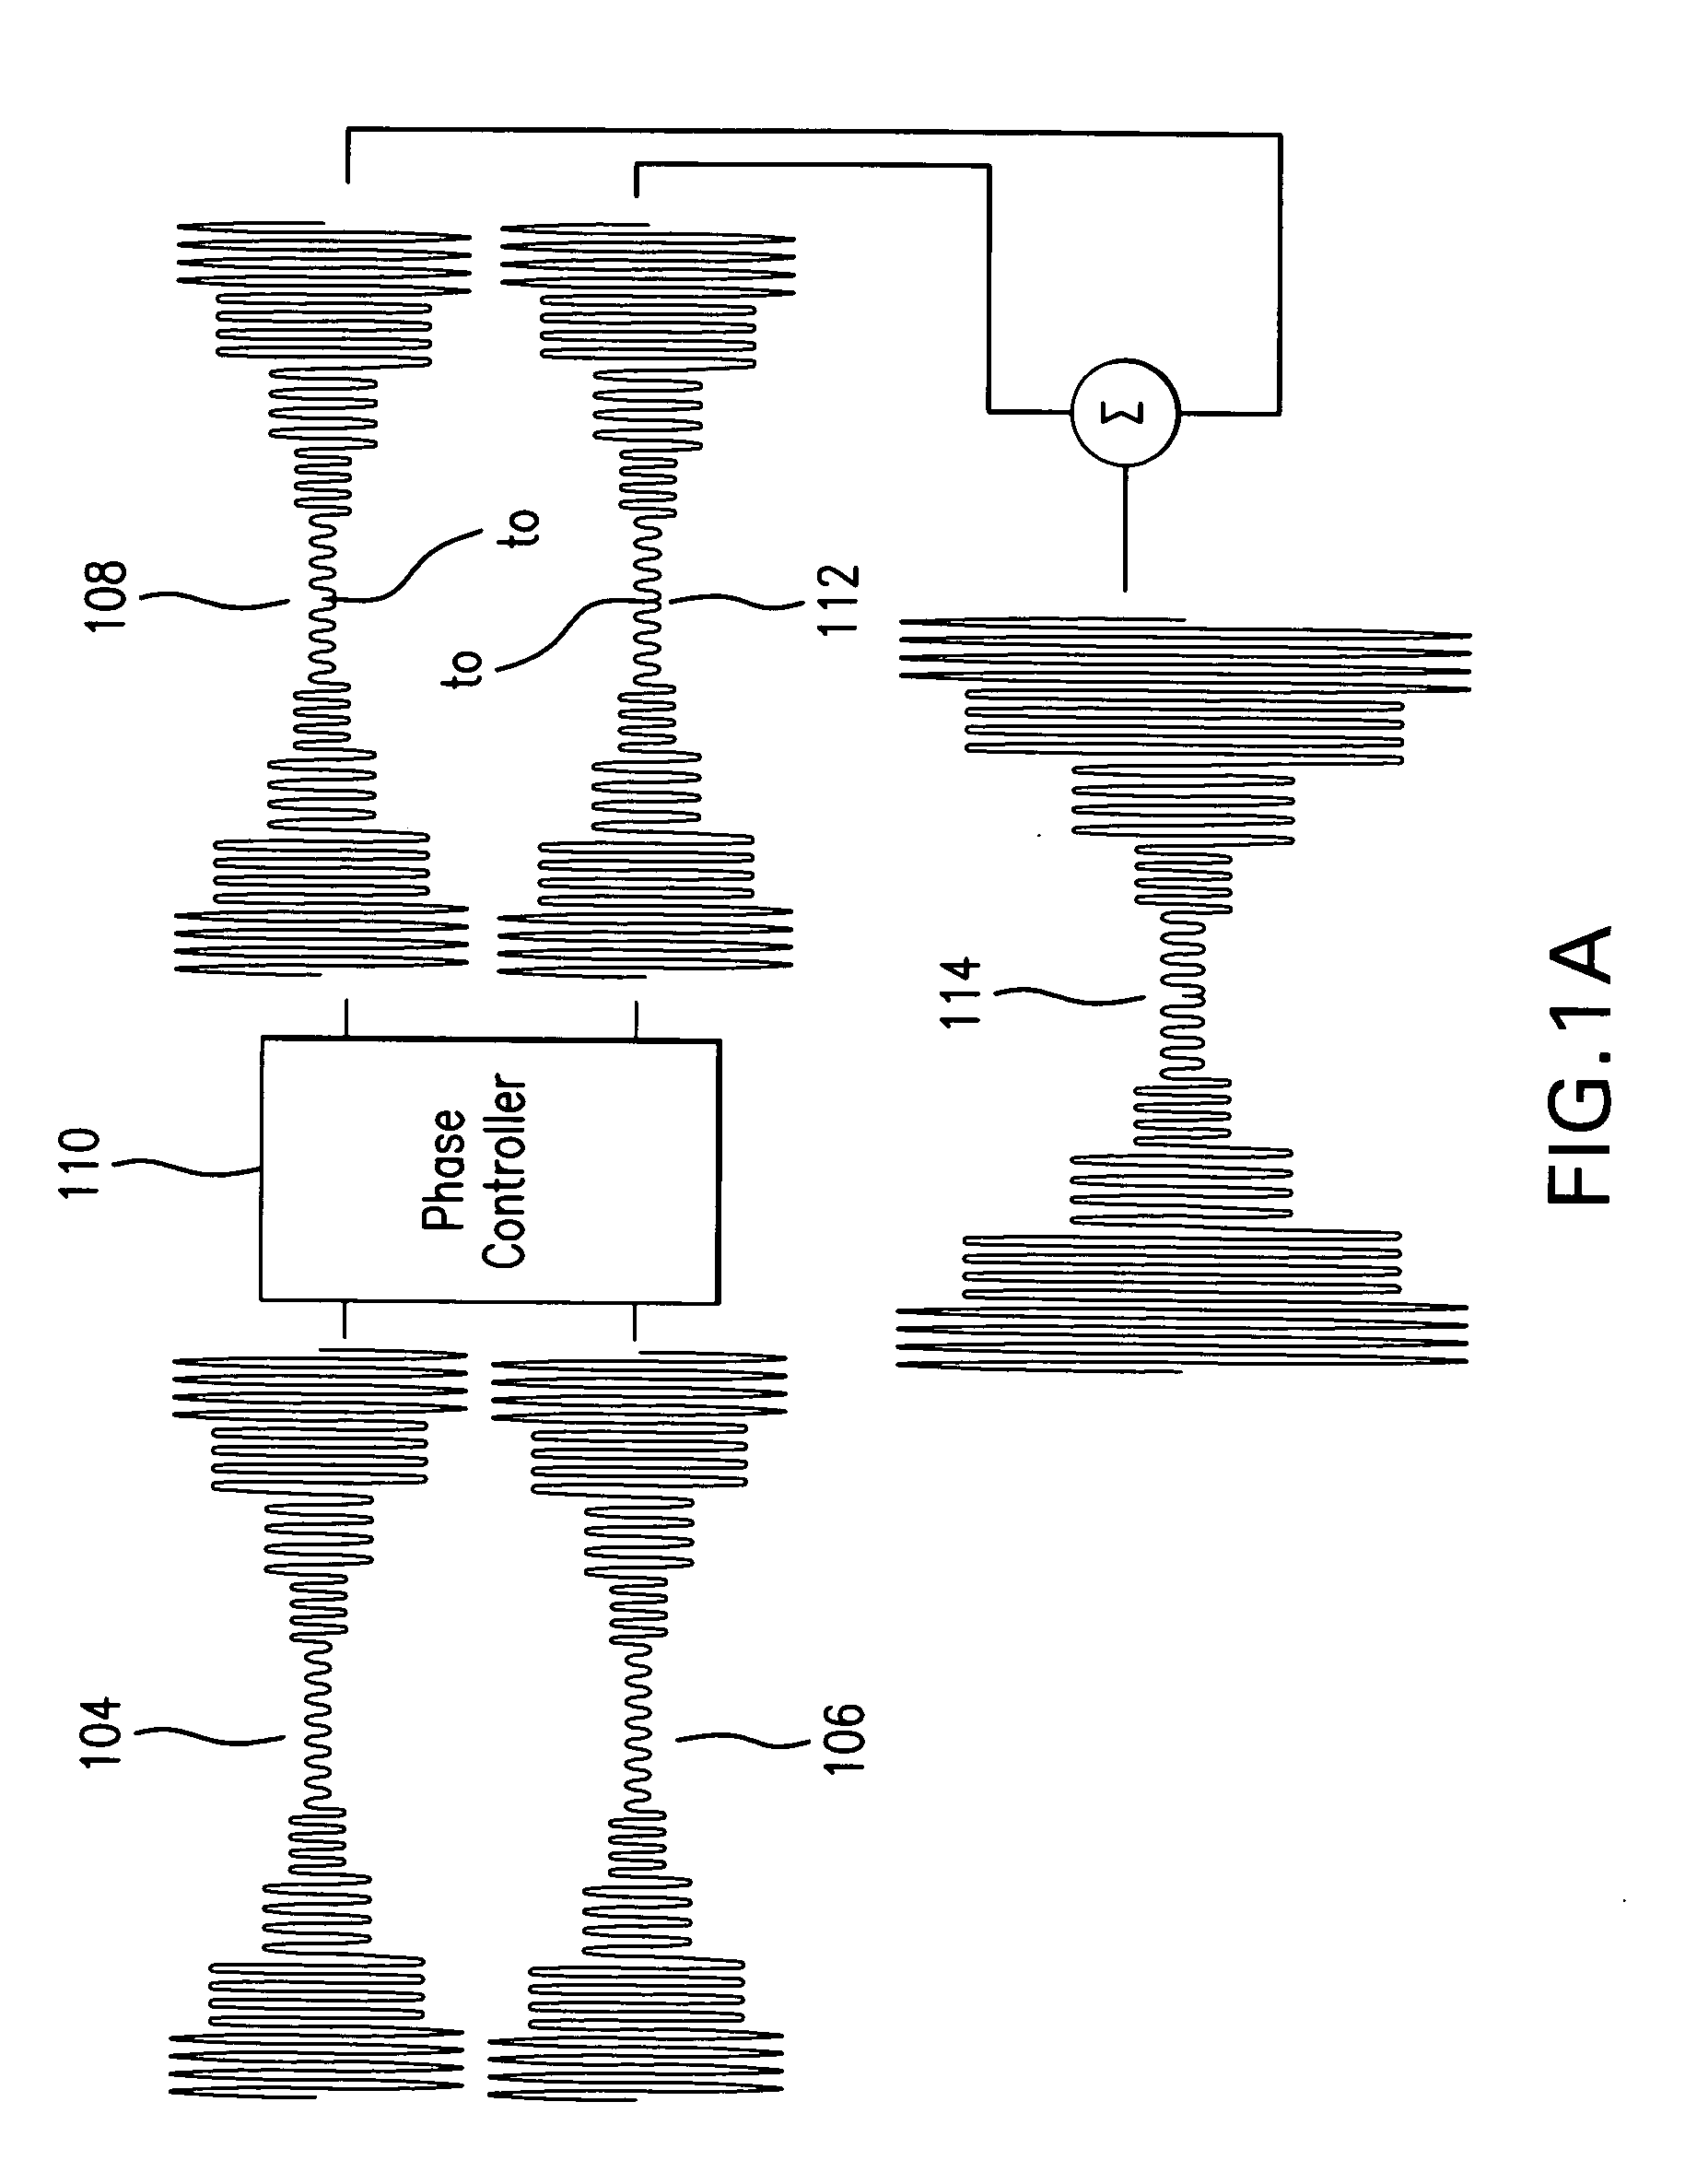 Systems and methods for vector power amplification